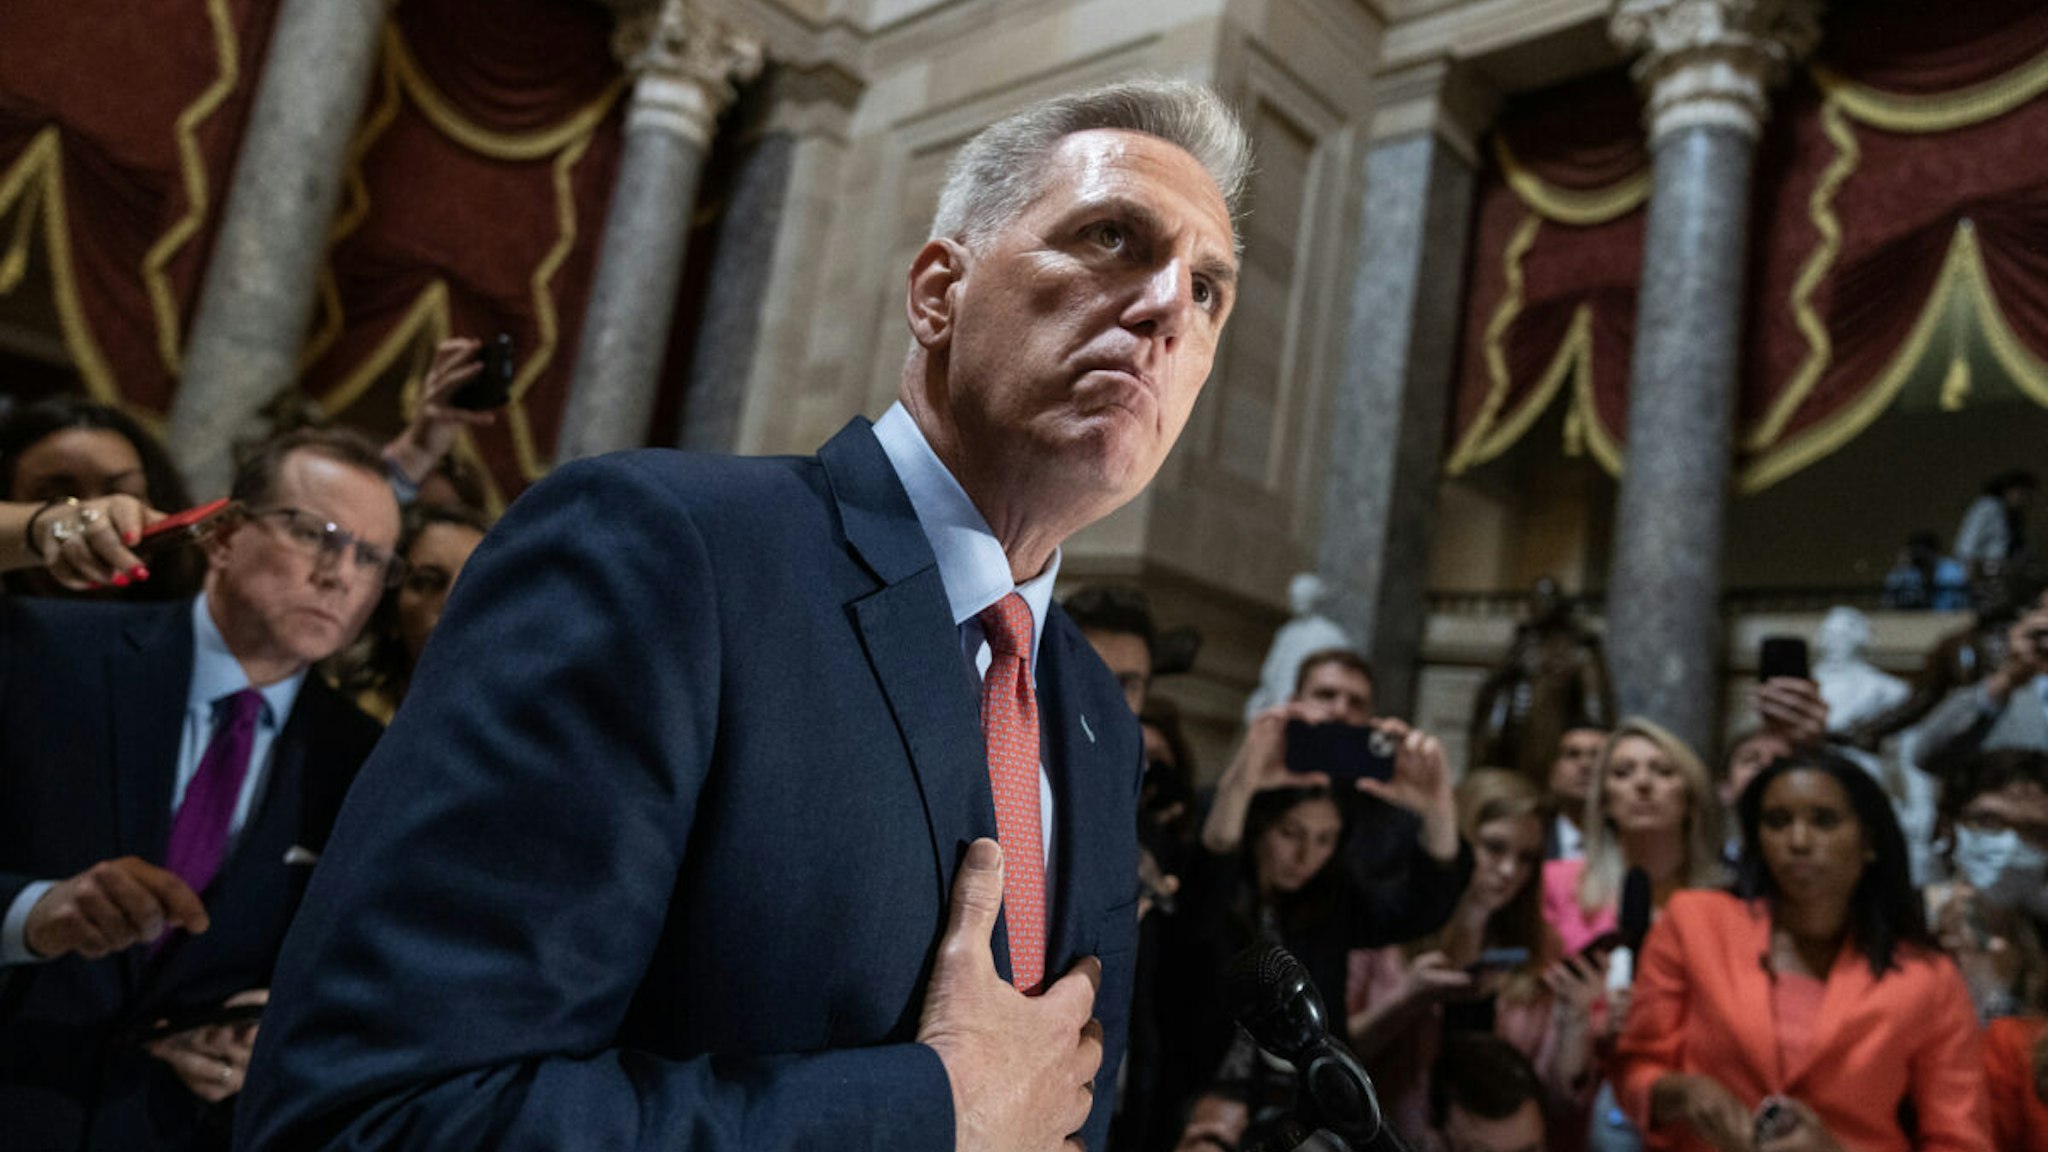 Speaker of the House Kevin McCarthy, R-Calif., talks with reporters about the debt ceiling negotiations in the U.S. Capitol's Statuary Hall on Wednesday, May 24, 2023.